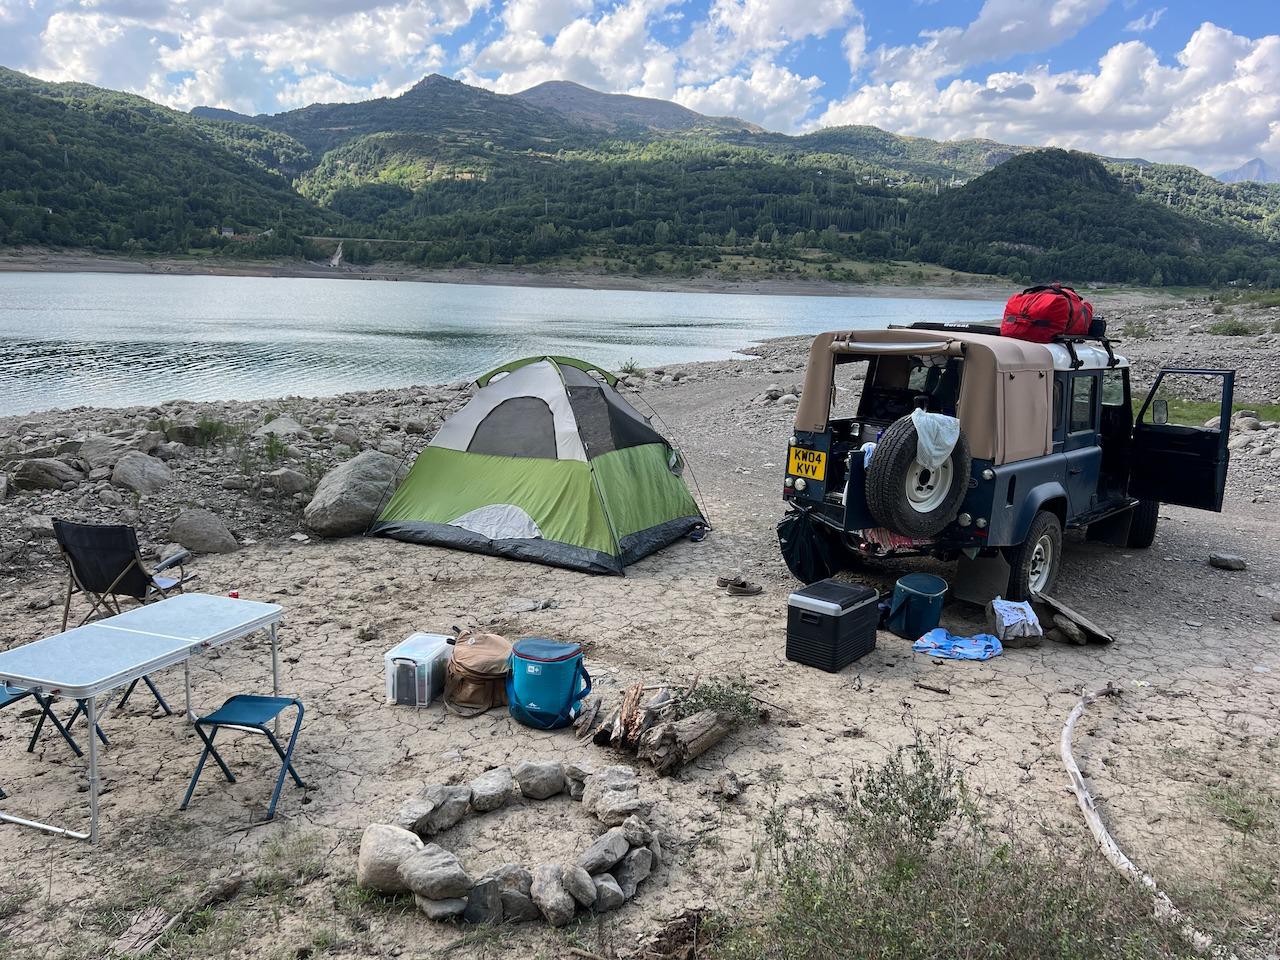 Wild camping near a reservoir in the Pyrenees